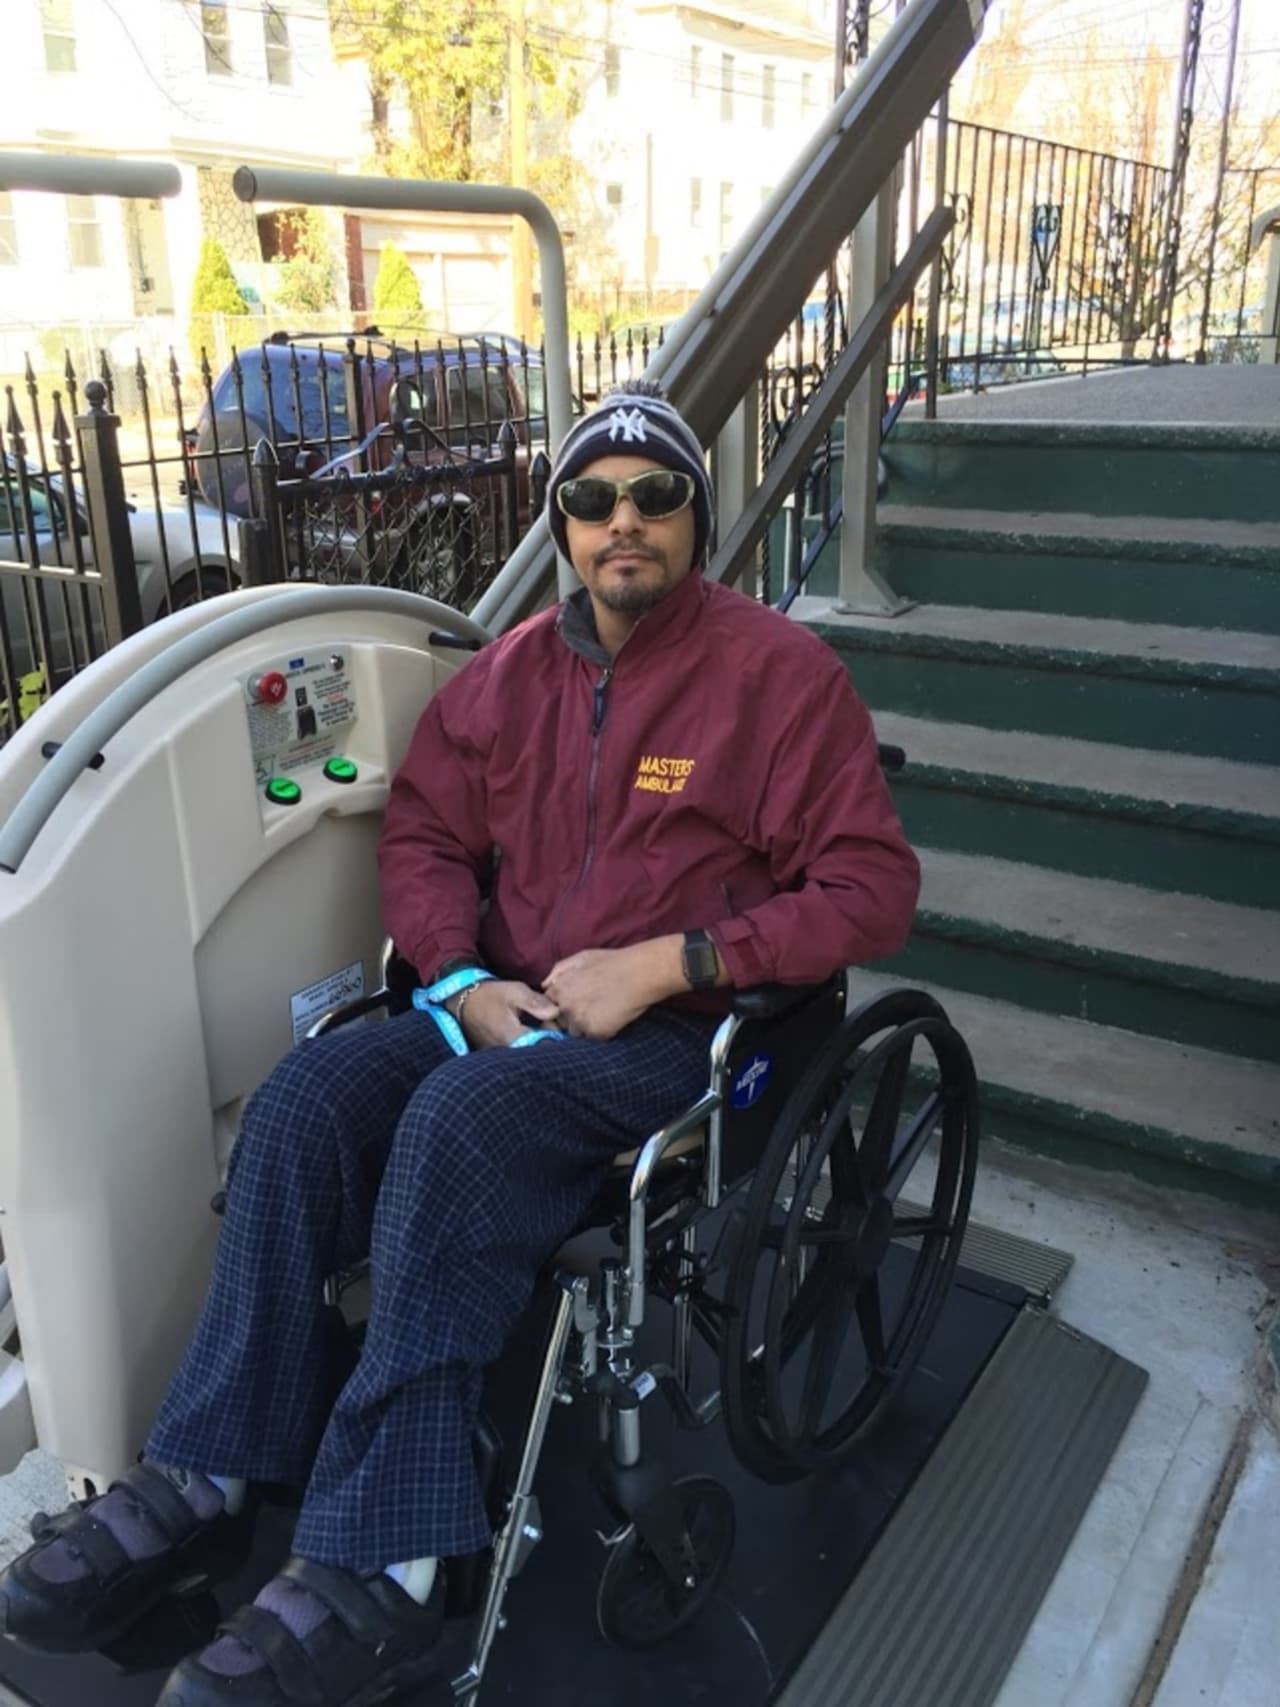 Conrado Bermudez of Paterson tries out his new chair lift, donated by Handi-Lift, Inc. in Carlstadt. The donation and connections to contractors were arranged through Giants of Generosity in Cresskill.